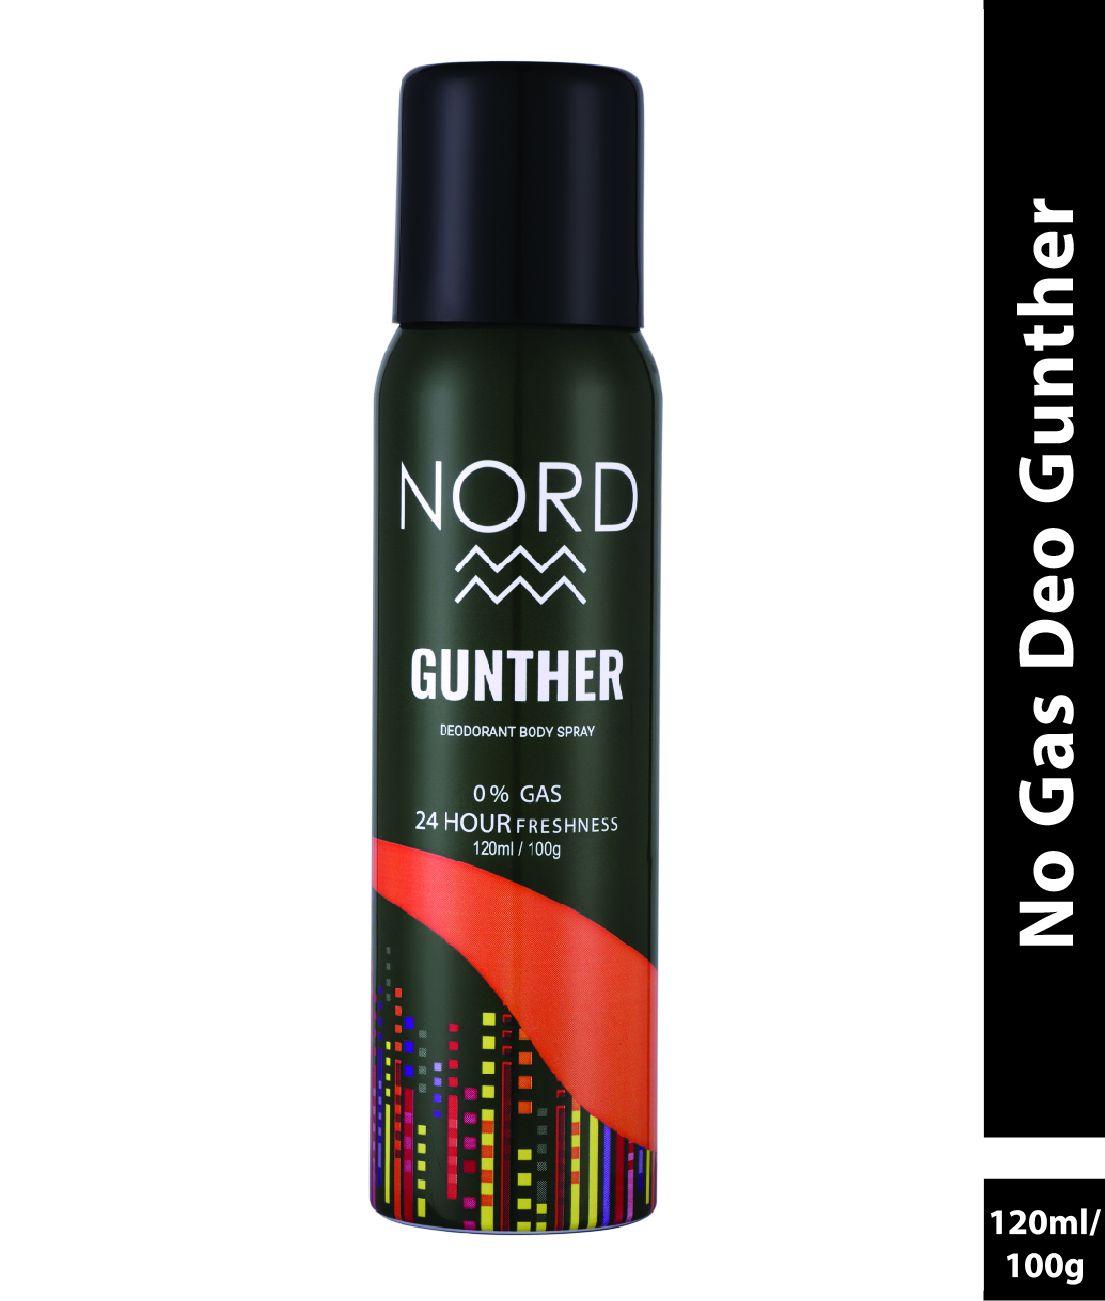 NORD - Gunther Perfume Body Spray for Men 120 ml ( Pack of 1 ): Buy NORD -  Gunther Perfume Body Spray for Men 120 ml ( Pack of 1 ) at Best Prices in  India - Snapdeal